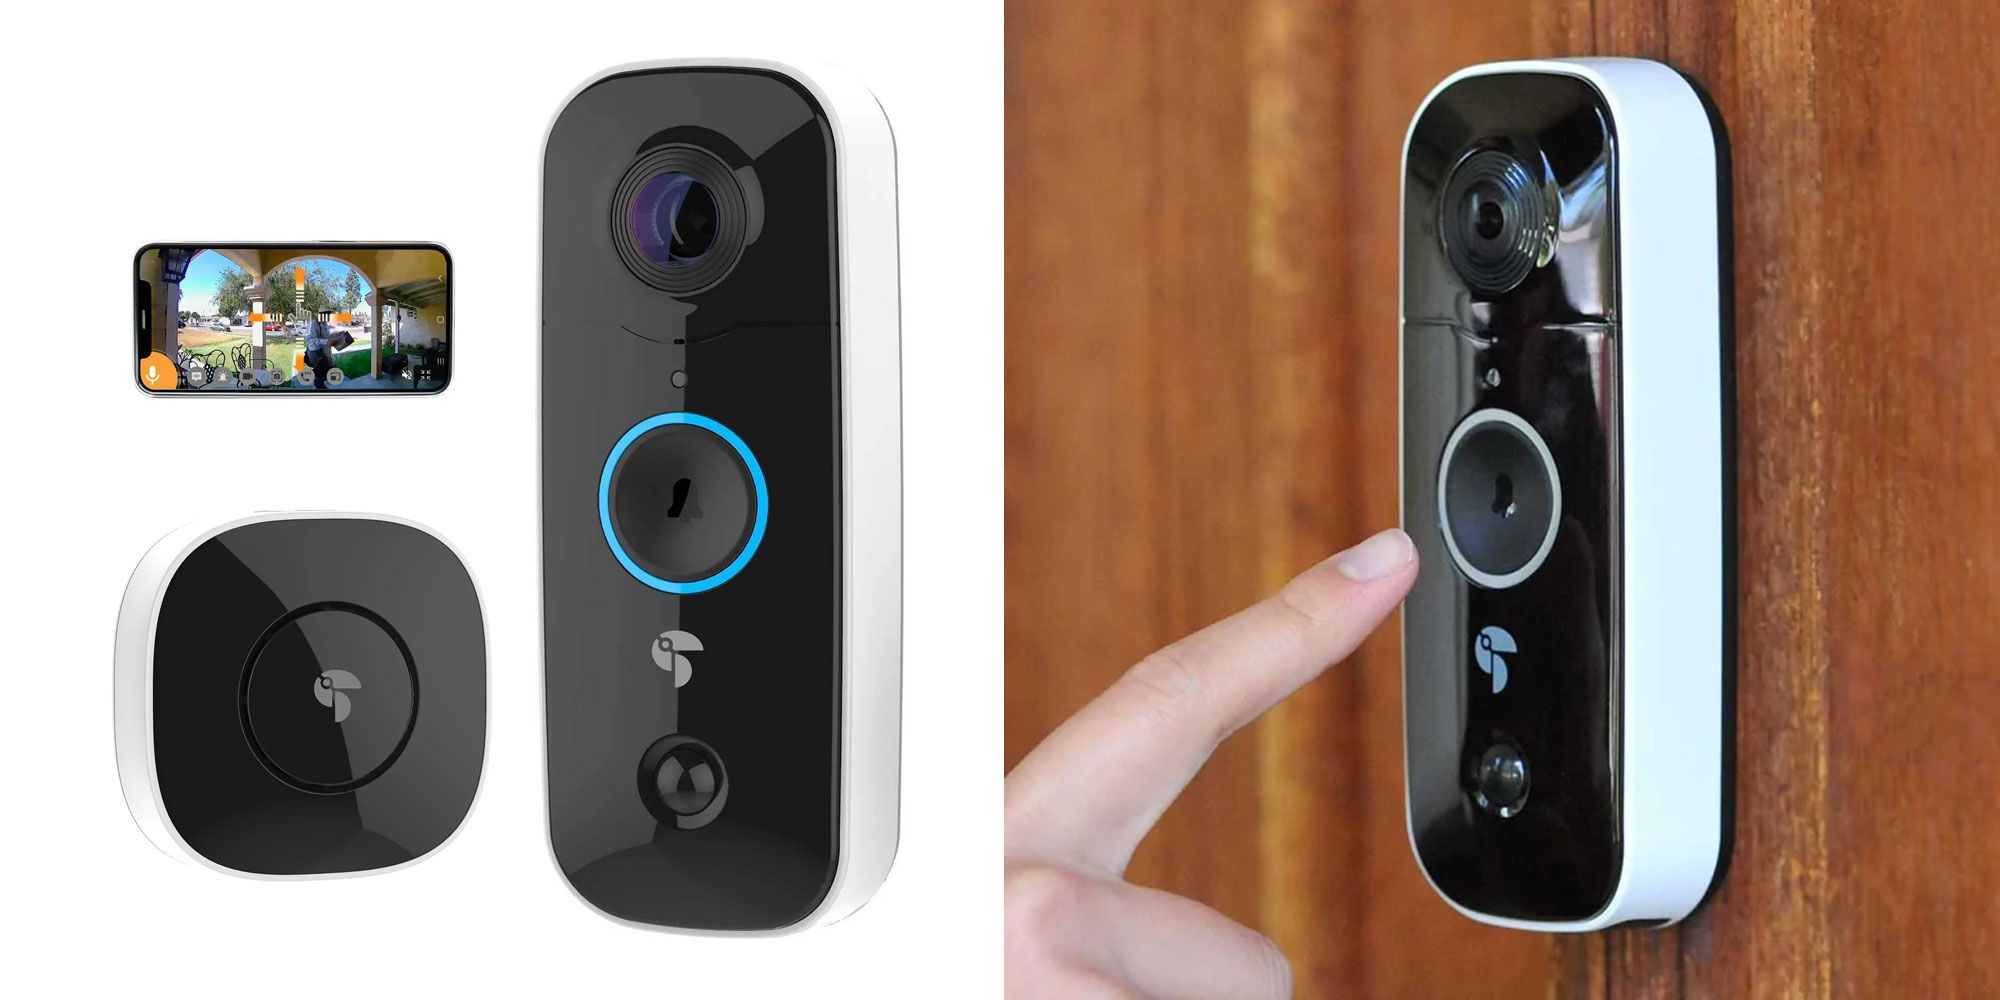 Product images of the TOUCAN 1080P Wireless Video Doorbell.